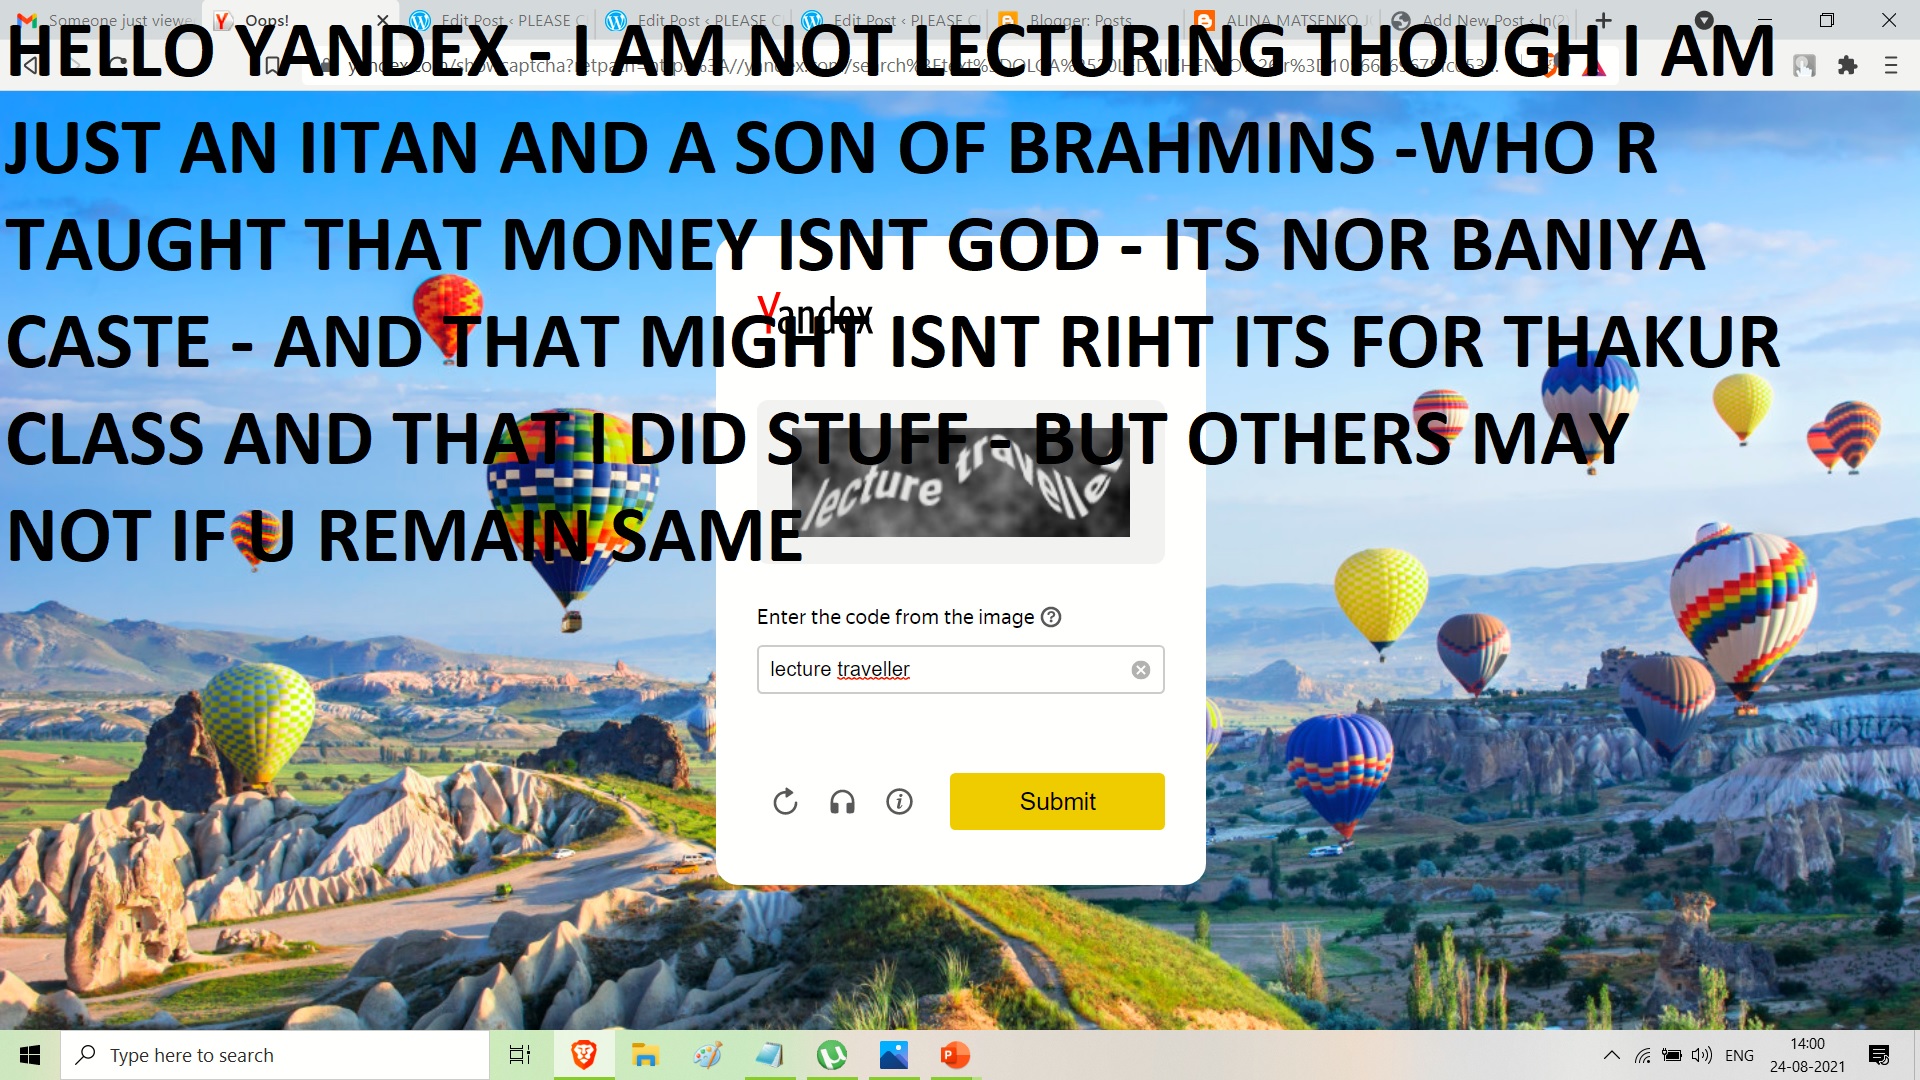 AJAY MISHAR YONI NETANAHY YANDEX HELLO YANDEX - I AM NOT LECTURING THOUGH I AM JUST AN IITAN AND A SON OF BRAHMINS -WHO R TAUGHT THAT MONEY ISNT GOD - ITS NOR BANIYA CASTE -